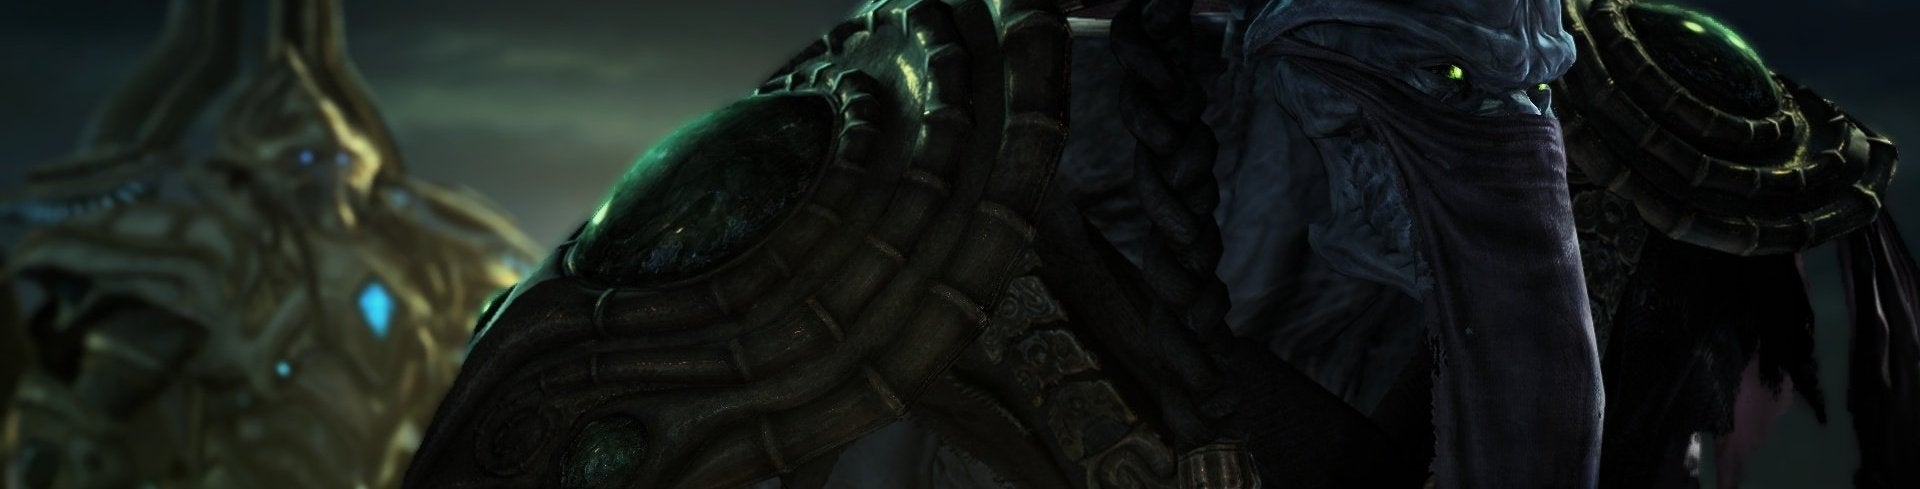 Image for StarCraft 2: Legacy of the Void's campaign is entertaining, but not quite excellent